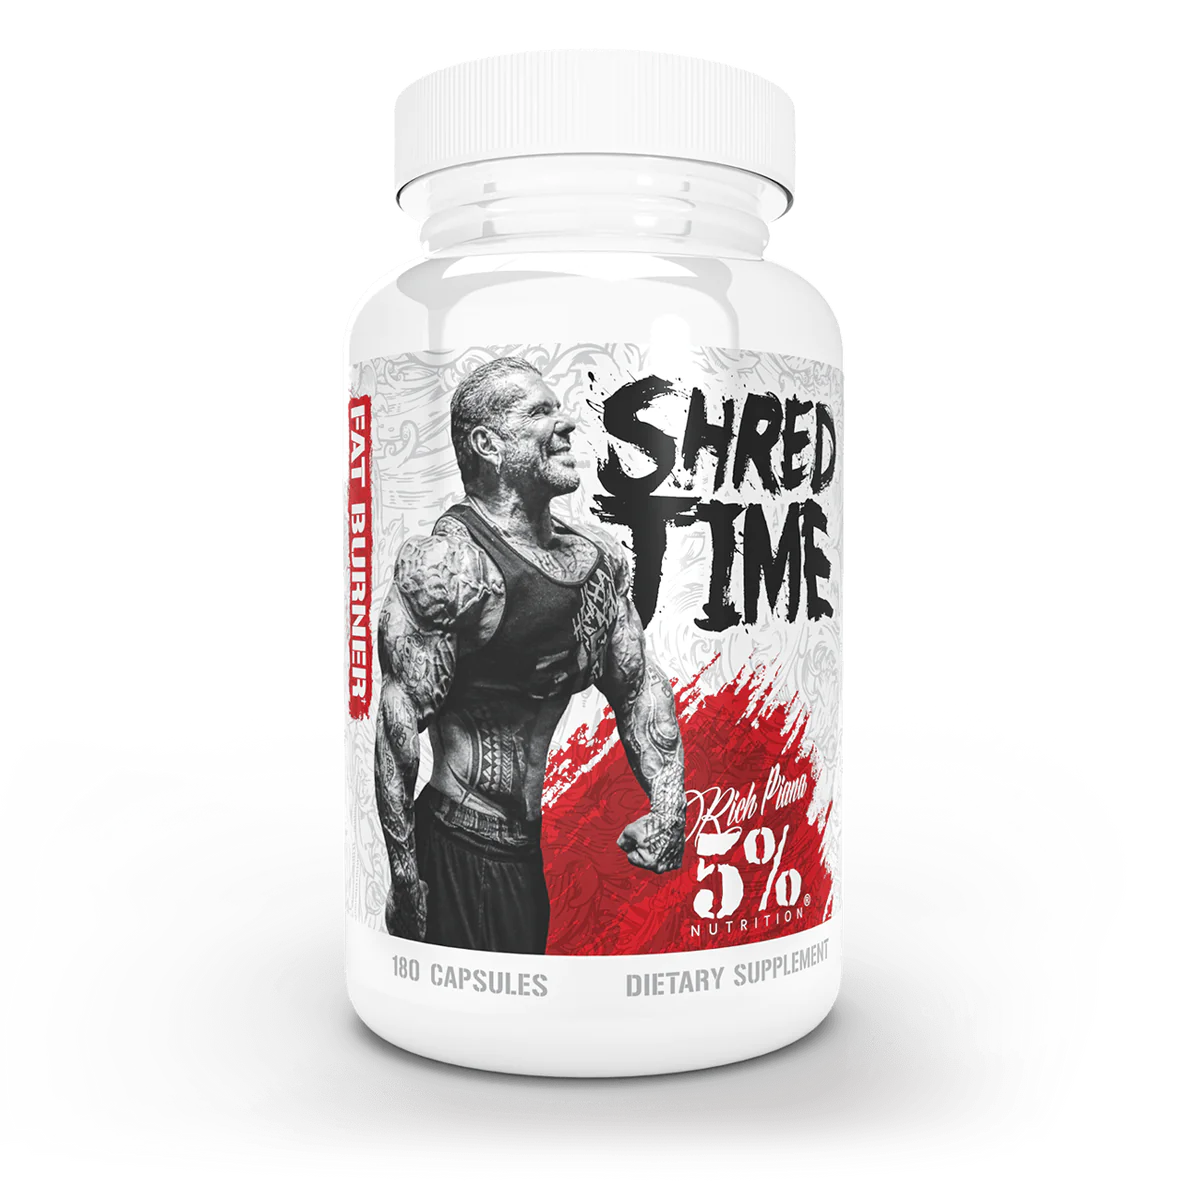 5% Nutrition | Shred Time